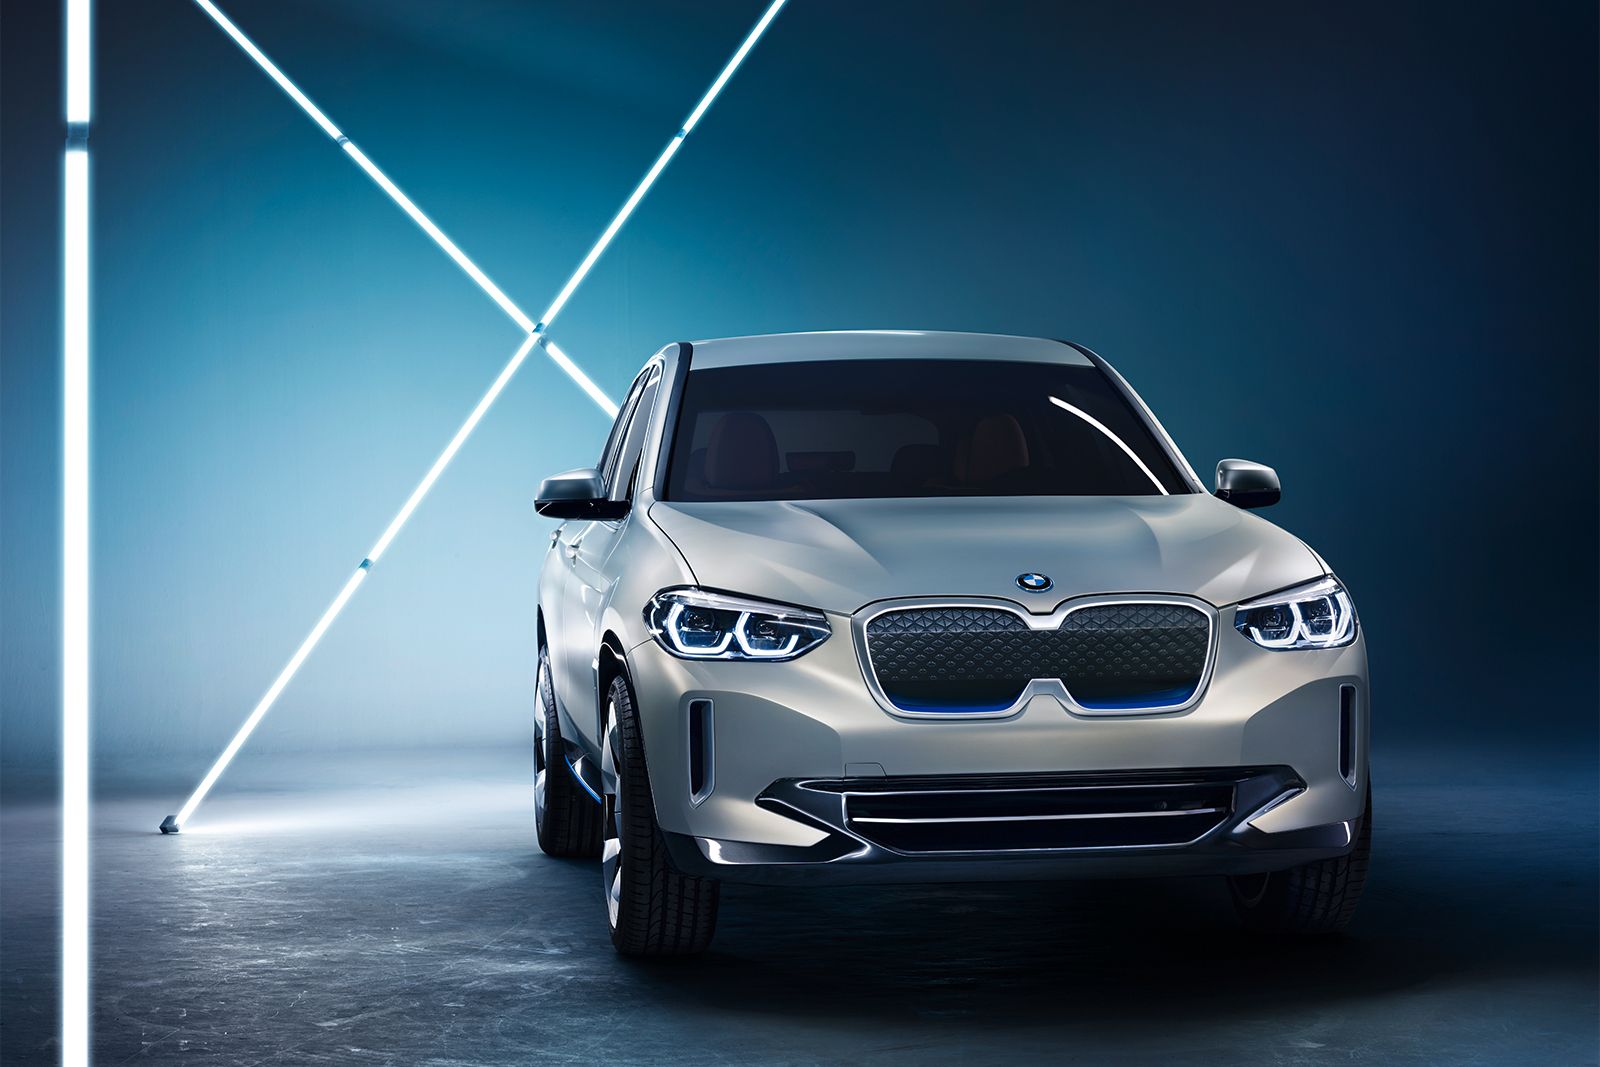 BMW reveals Concept iX3 all-electric SUV will go on sale in 2020 image 1